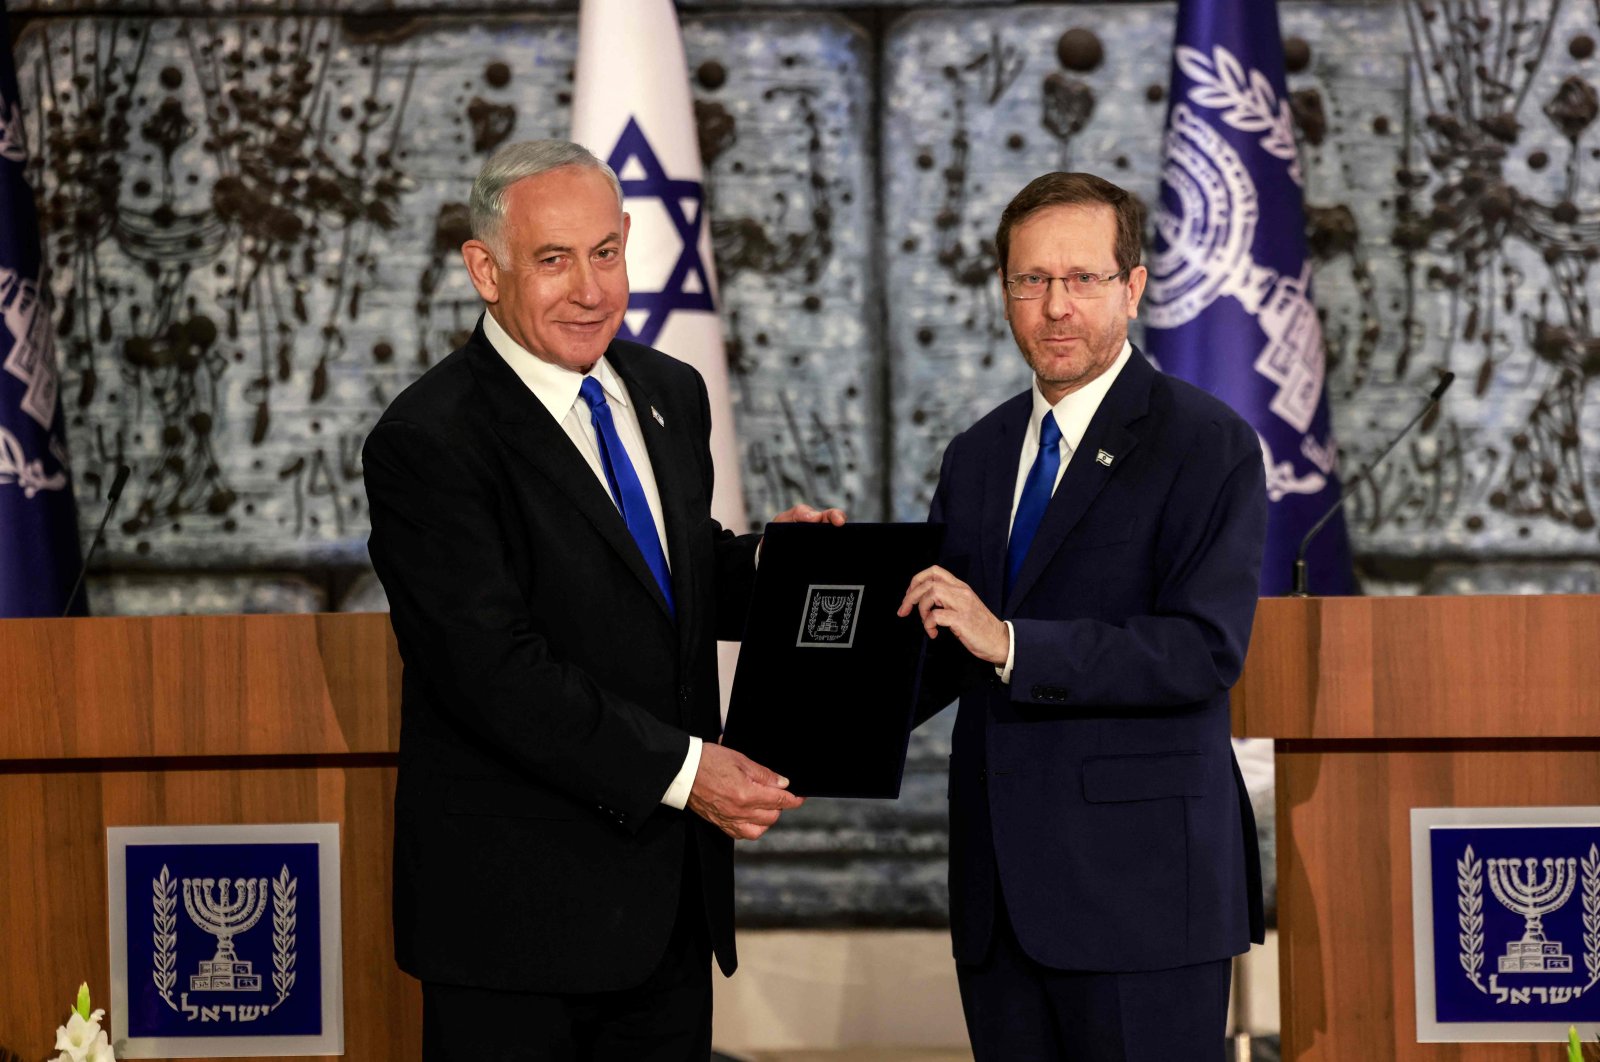 Israel&#039;s President Isaac Herzog (R) and Likud party Chairman Benjamin Netanyahu pose for a photograph after the former tasked the latter with forming a new government, Jerusalem, Israel, Nov. 13, 2022. (AFP Photo)